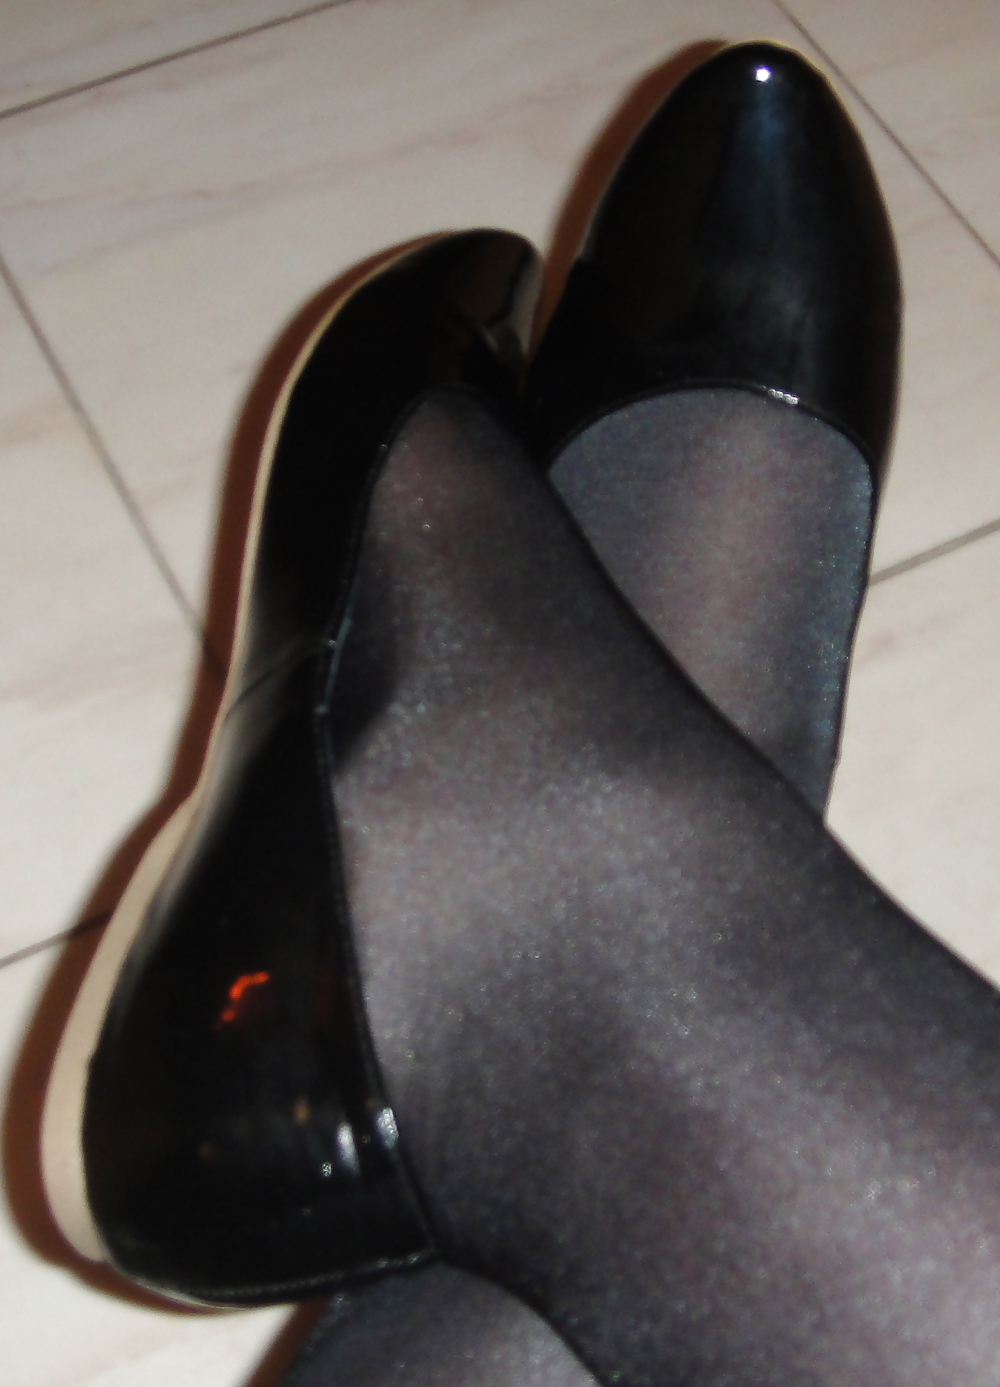 New pantyhose, new shoes and a NEW TOY #7153093